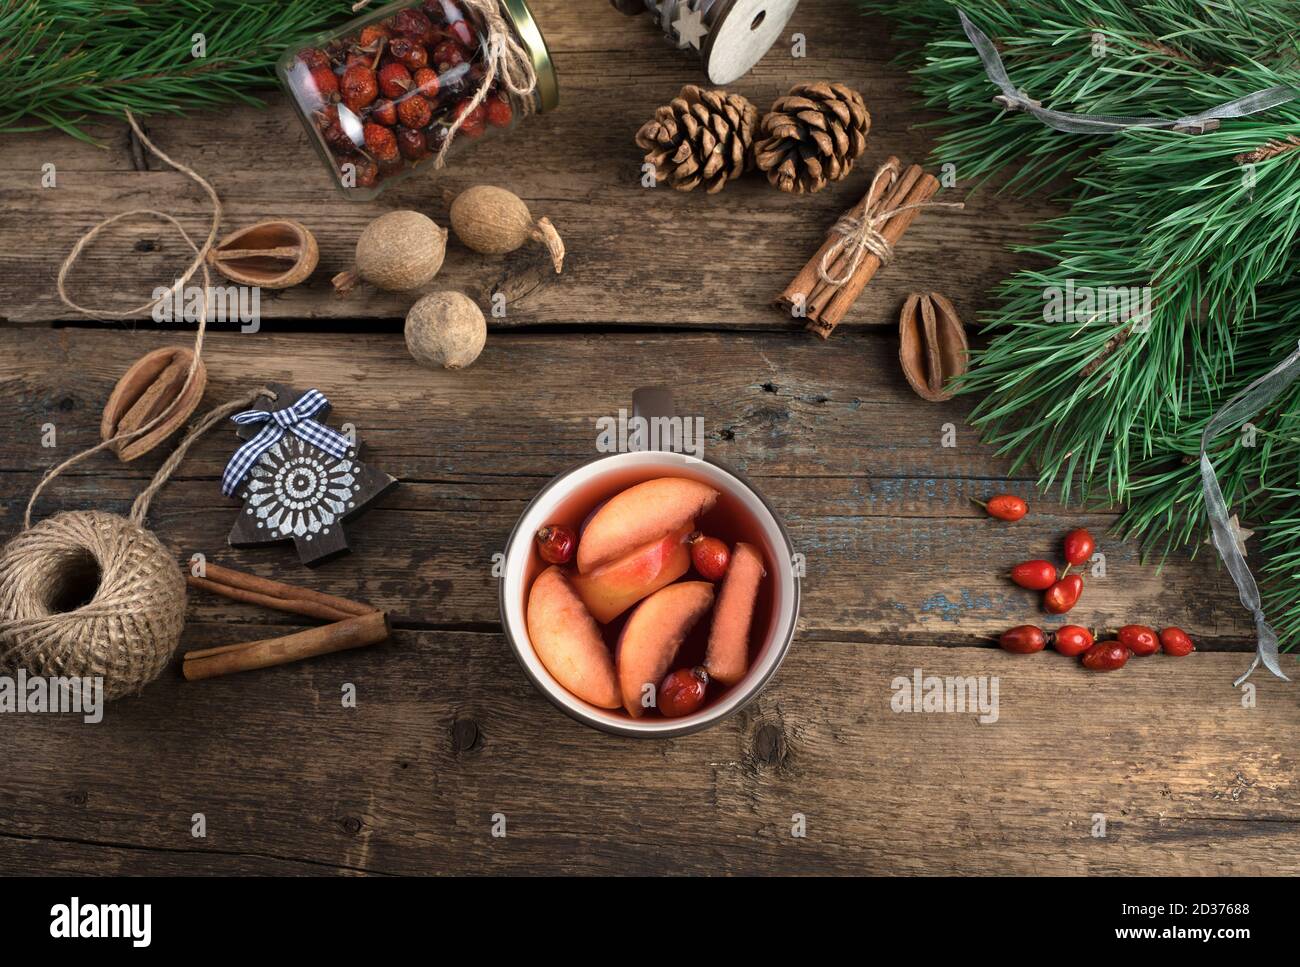 A Cup of mulled wine with fruit, berries and cinnamon on a wooden background with pine branches and Christmas toys. Stock Photo